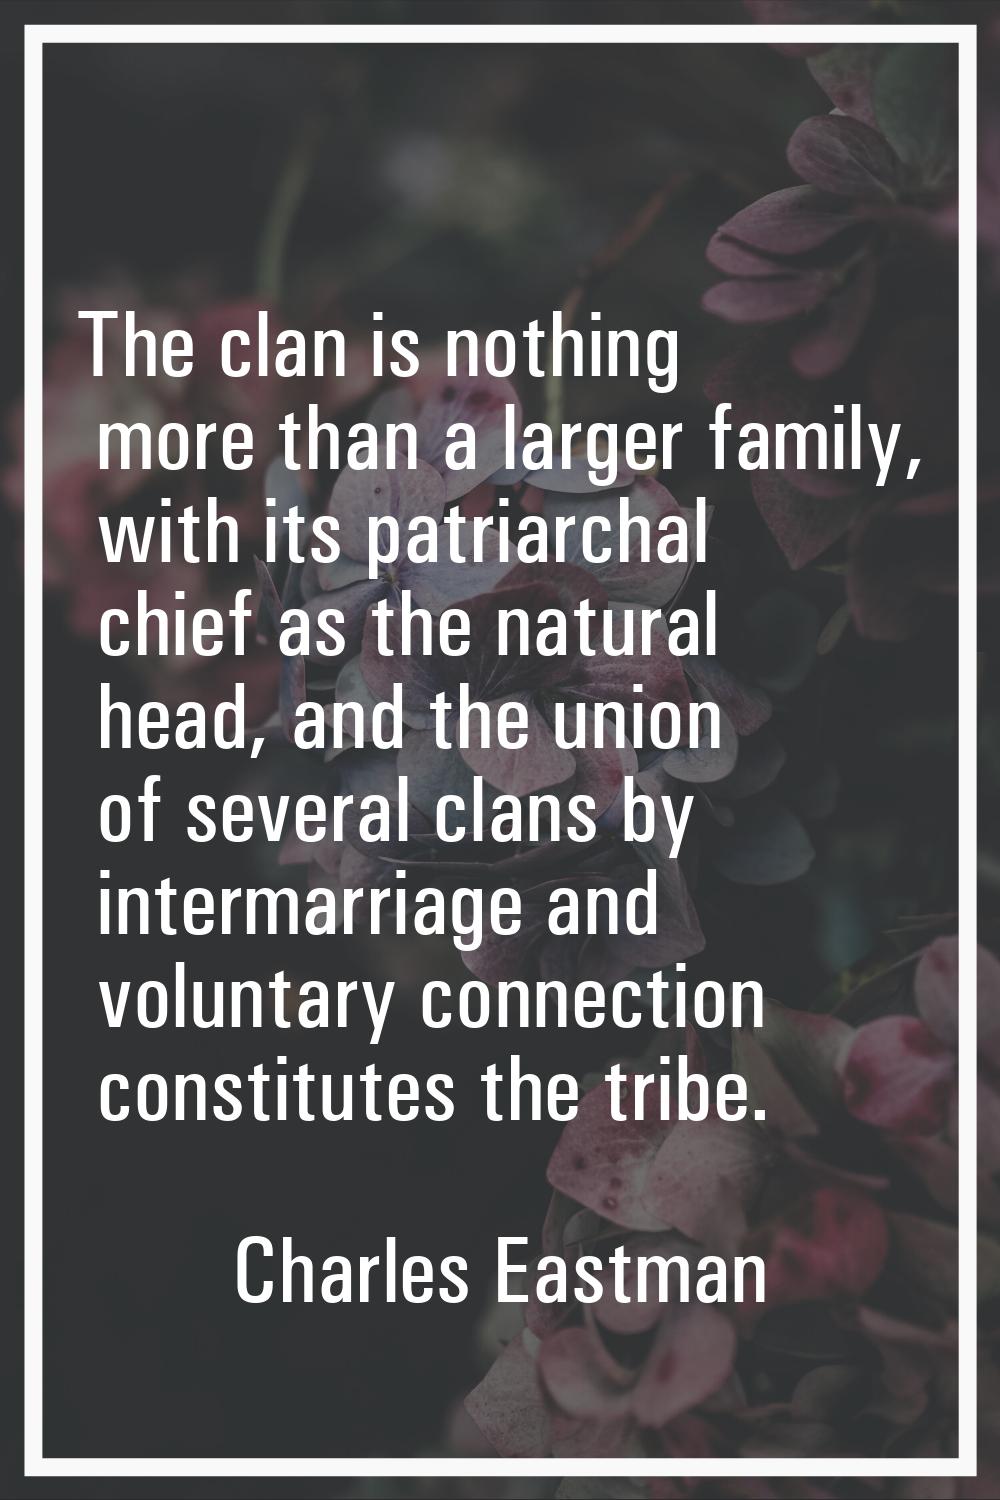 The clan is nothing more than a larger family, with its patriarchal chief as the natural head, and 